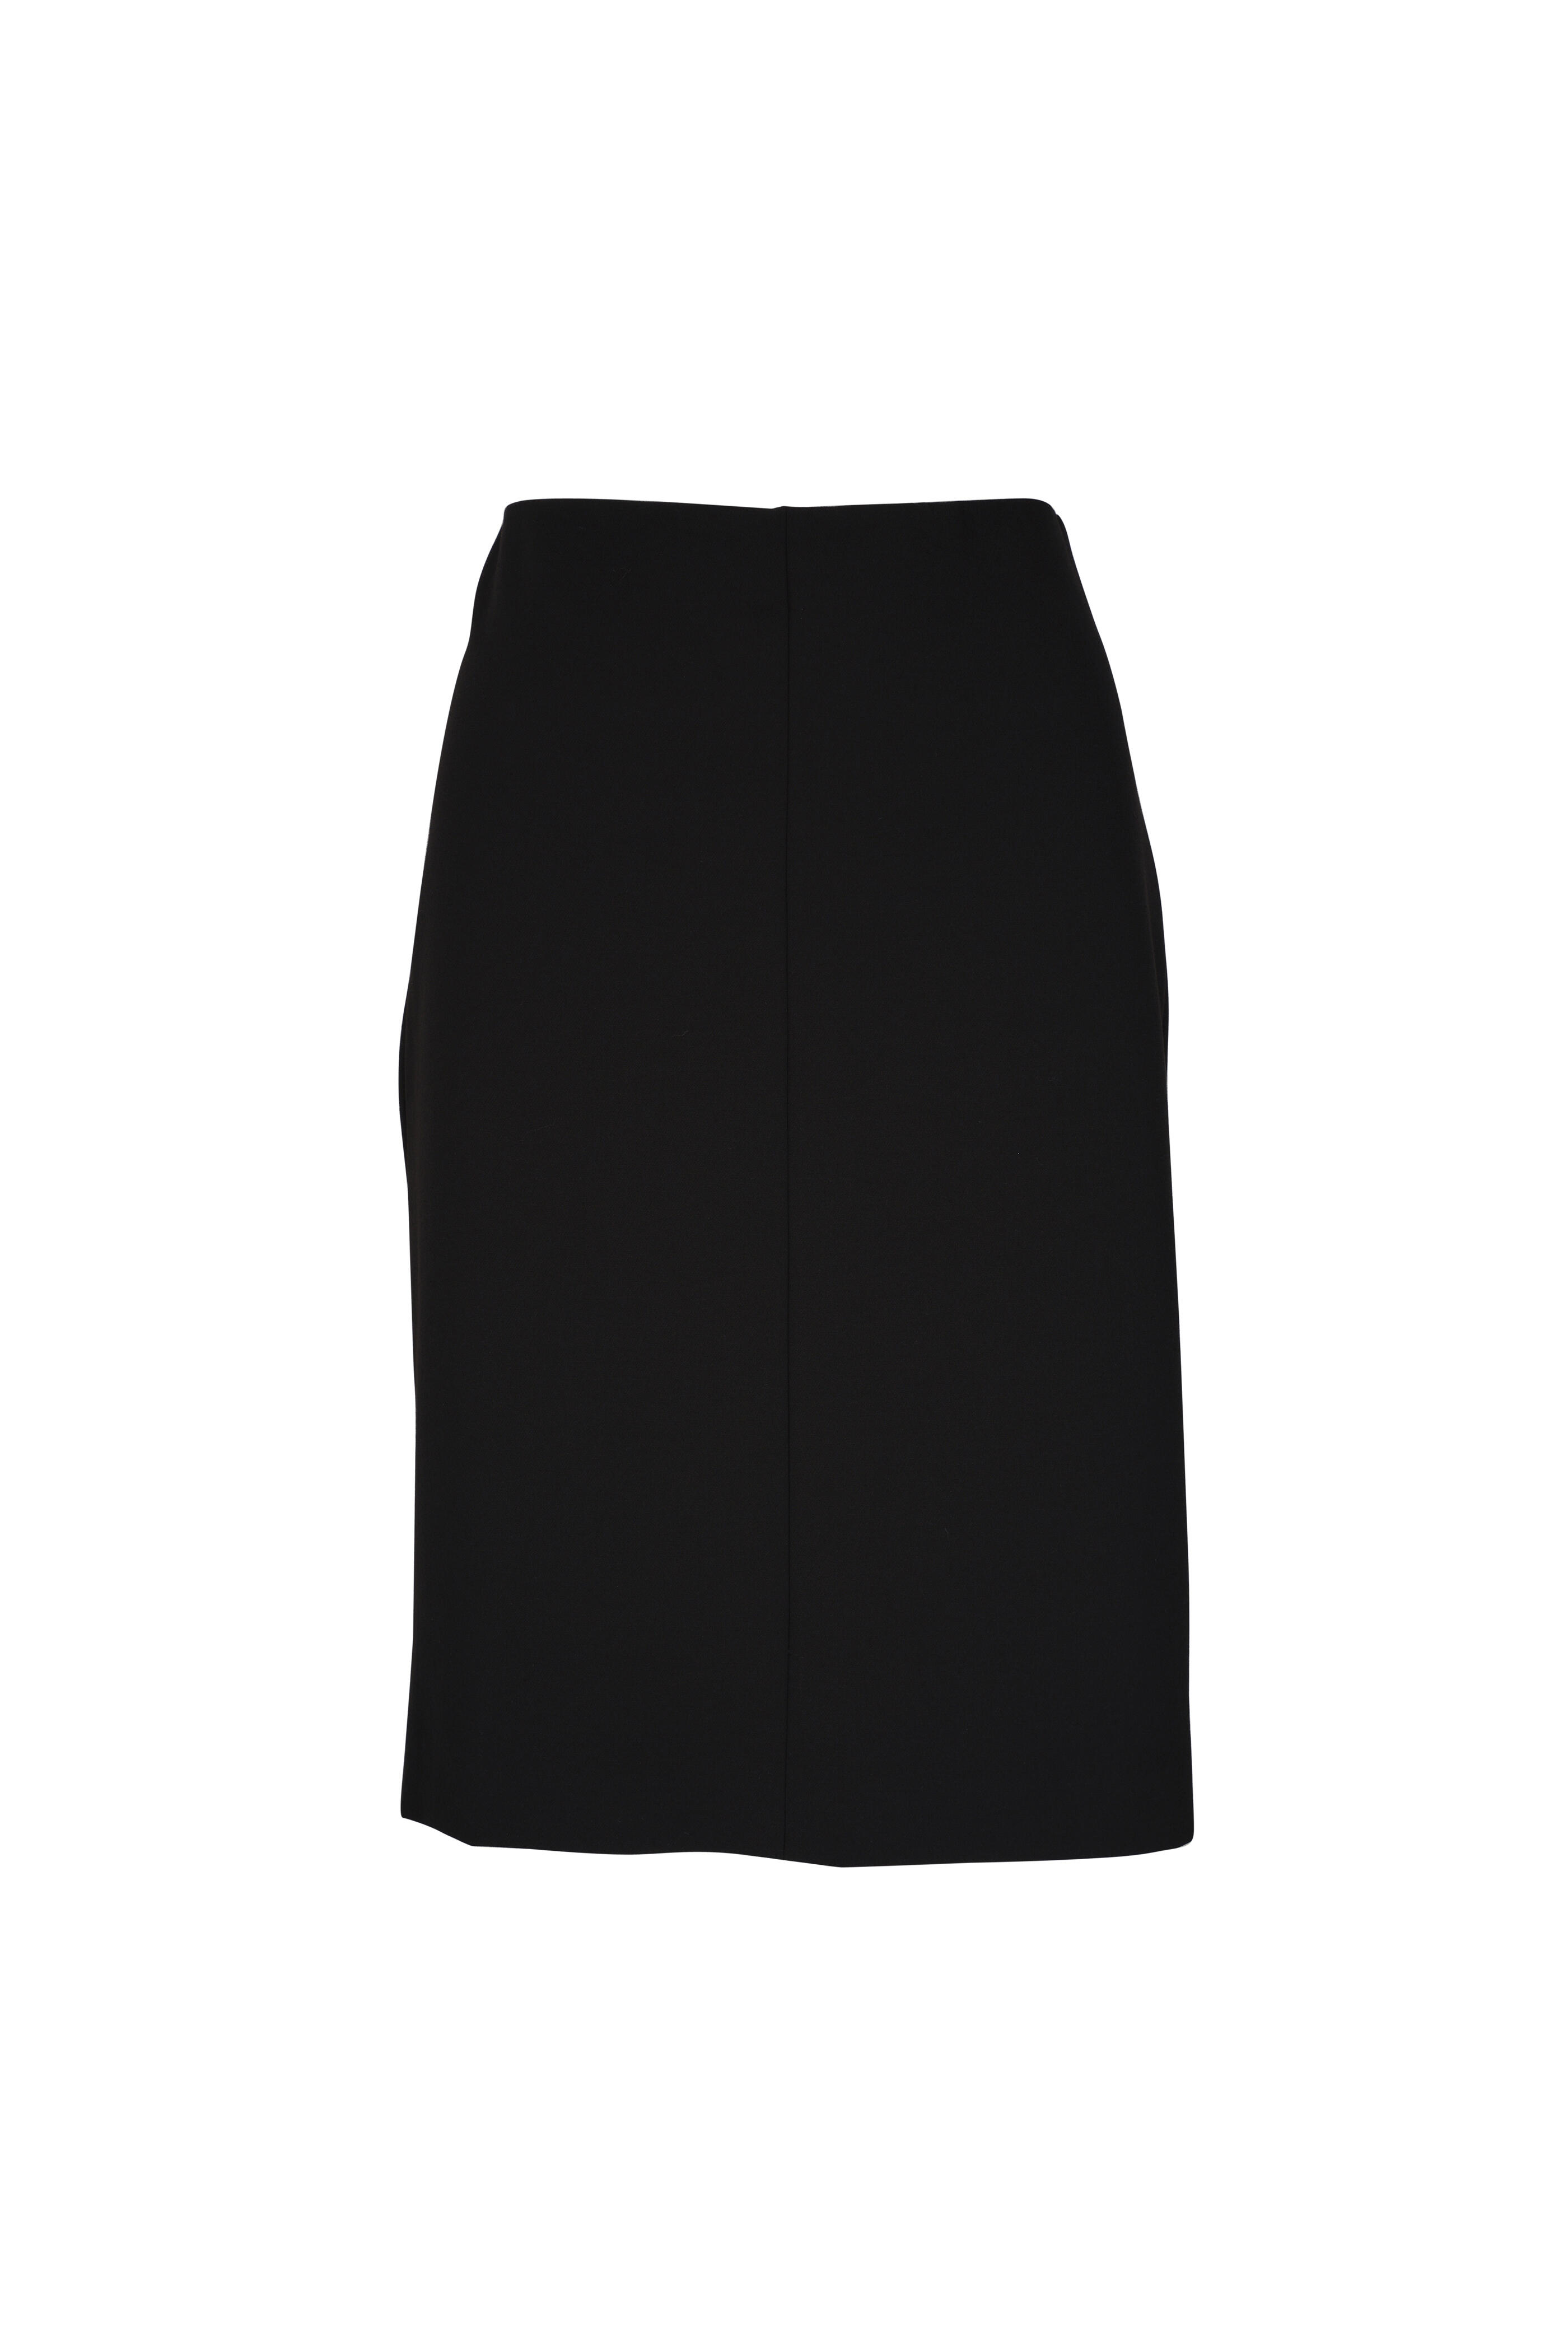 Vince - Seamed Front Black Pencil Skirt | Mitchell Stores